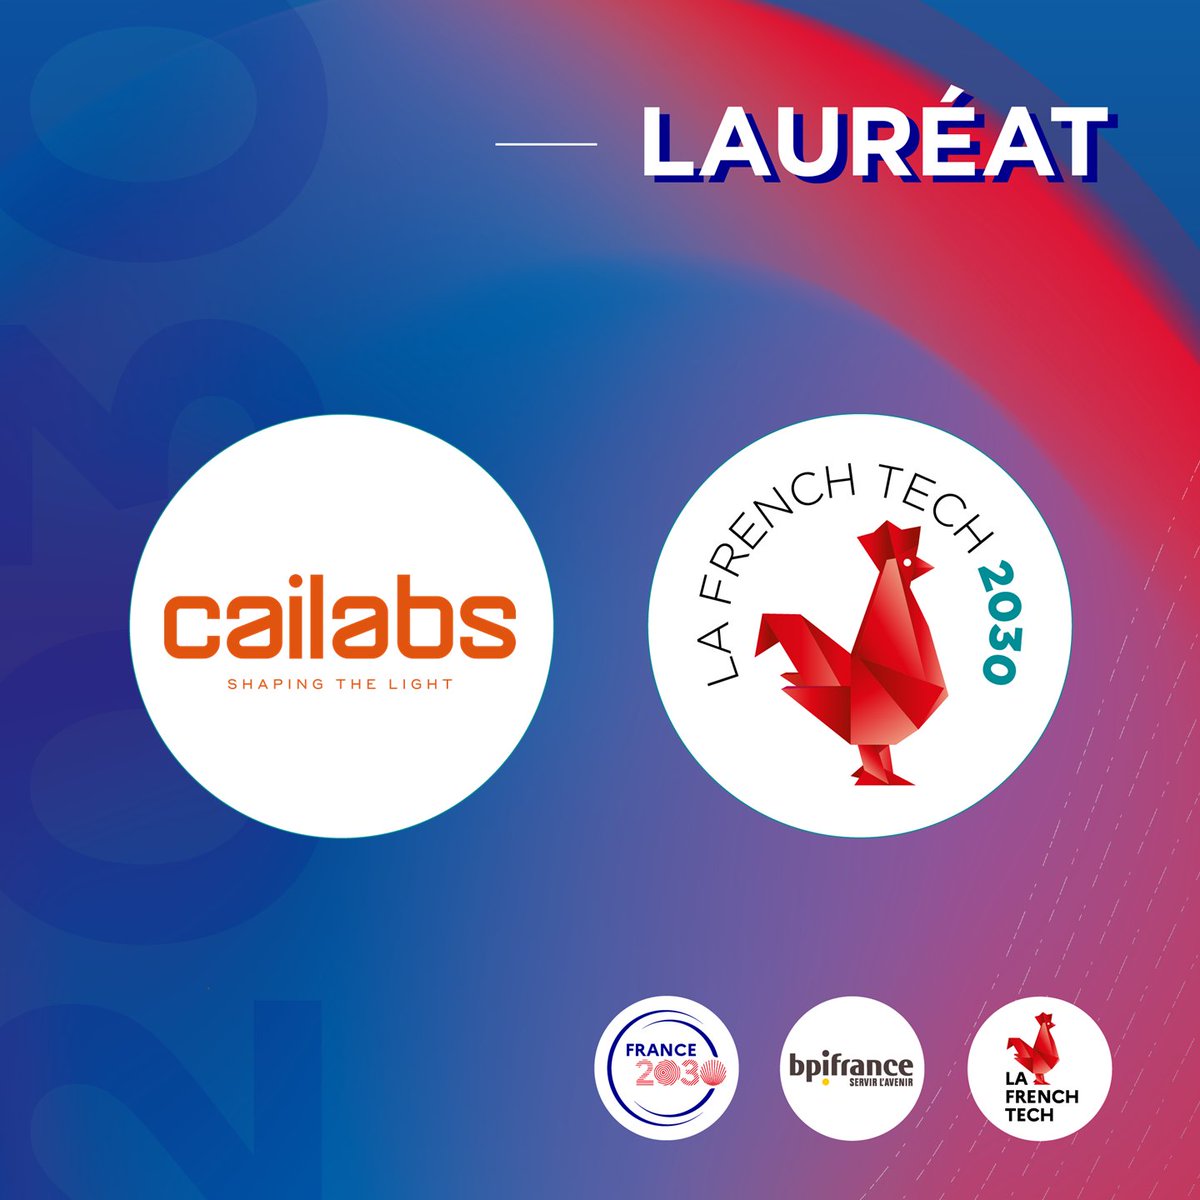 🏆 Cailabs wins 1st edition of #FrenchTech2030! 🏆

Excited to announce our selection for this support program by La French Tech, Secrétariat général pour l'investissement, and Bpifrance. Congrats to all laureates!

#Innovation #Technology #Startups #FrenchTech2030